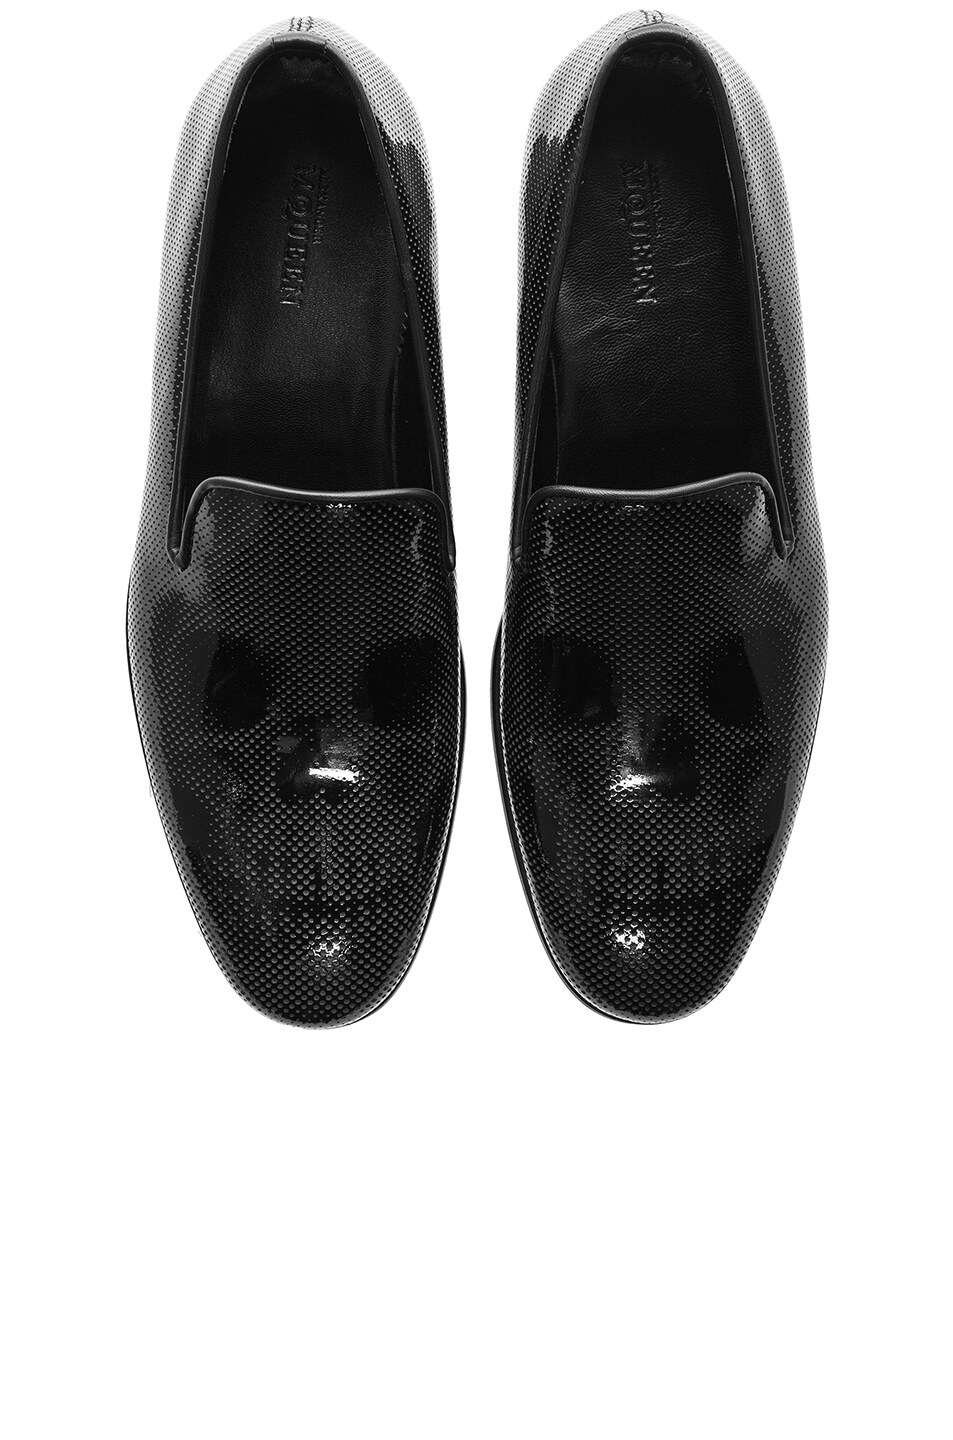 Image 1 of Alexander McQueen Skull Patent Leather Loafers in Black